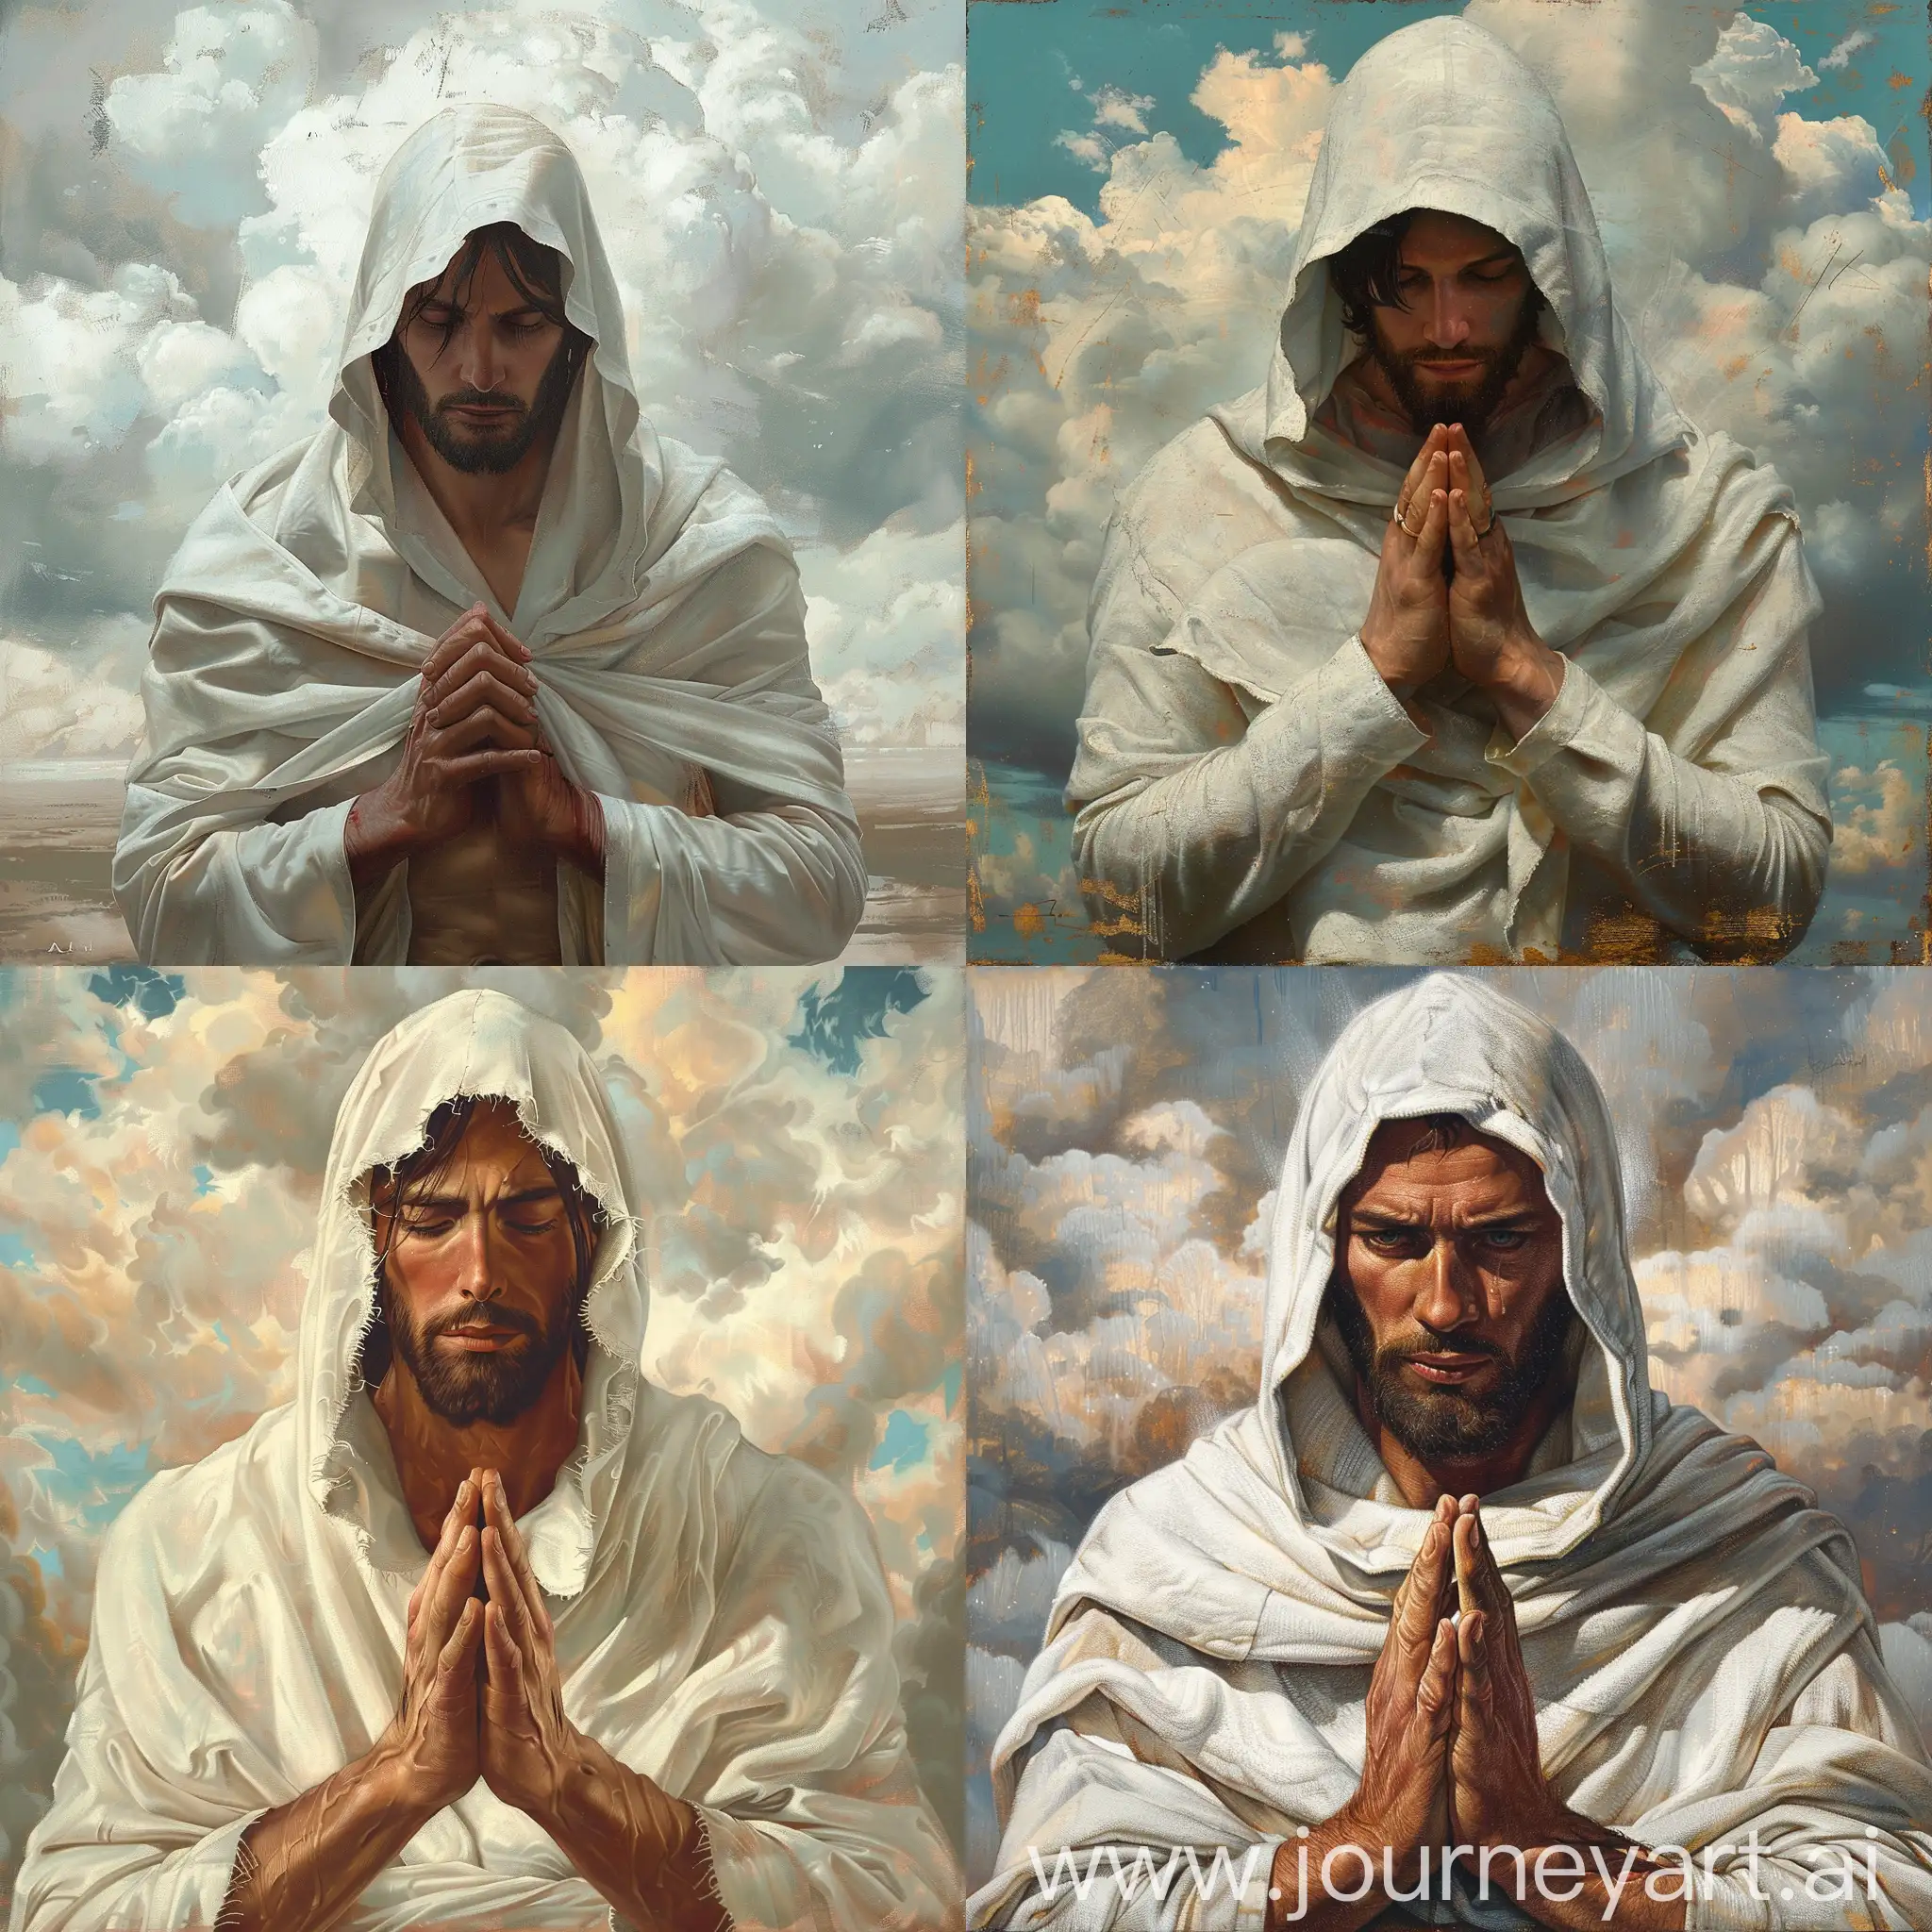 The image features Jesus with hands clasped in prayer, wearing a white hooded robe. The background shows a cloudy sky.